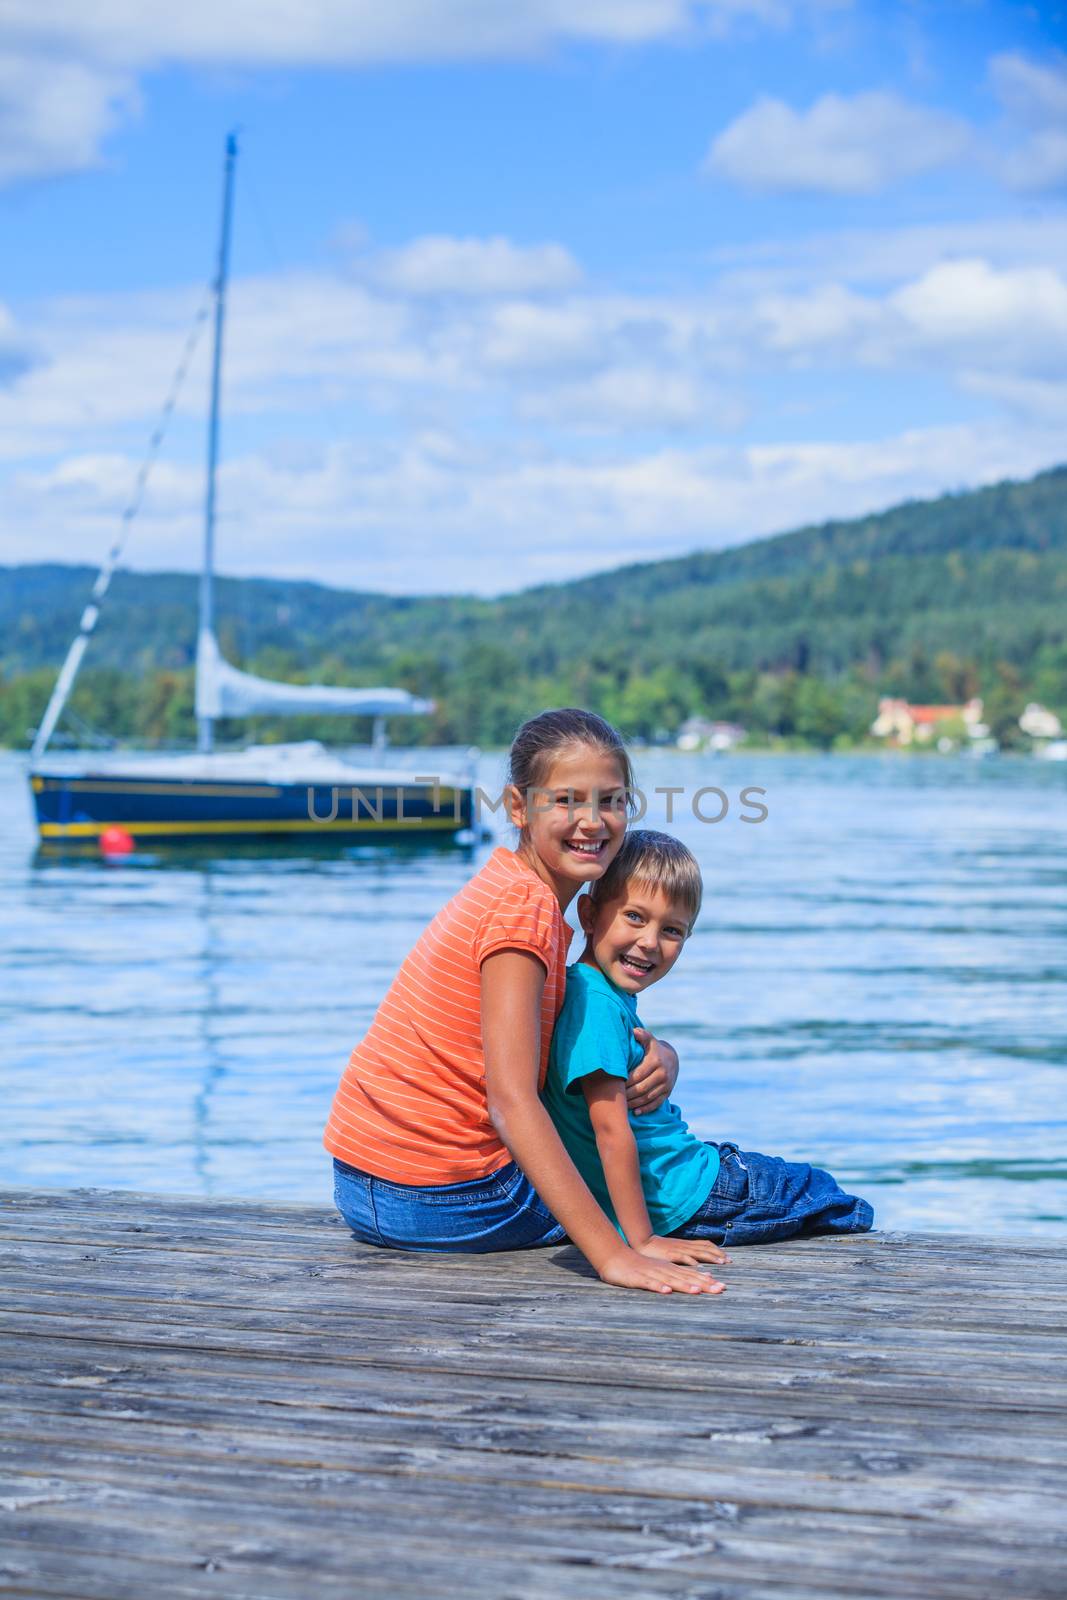 Summer vacation  at the lake - two happy kids resting on the pier and watching on the yacht